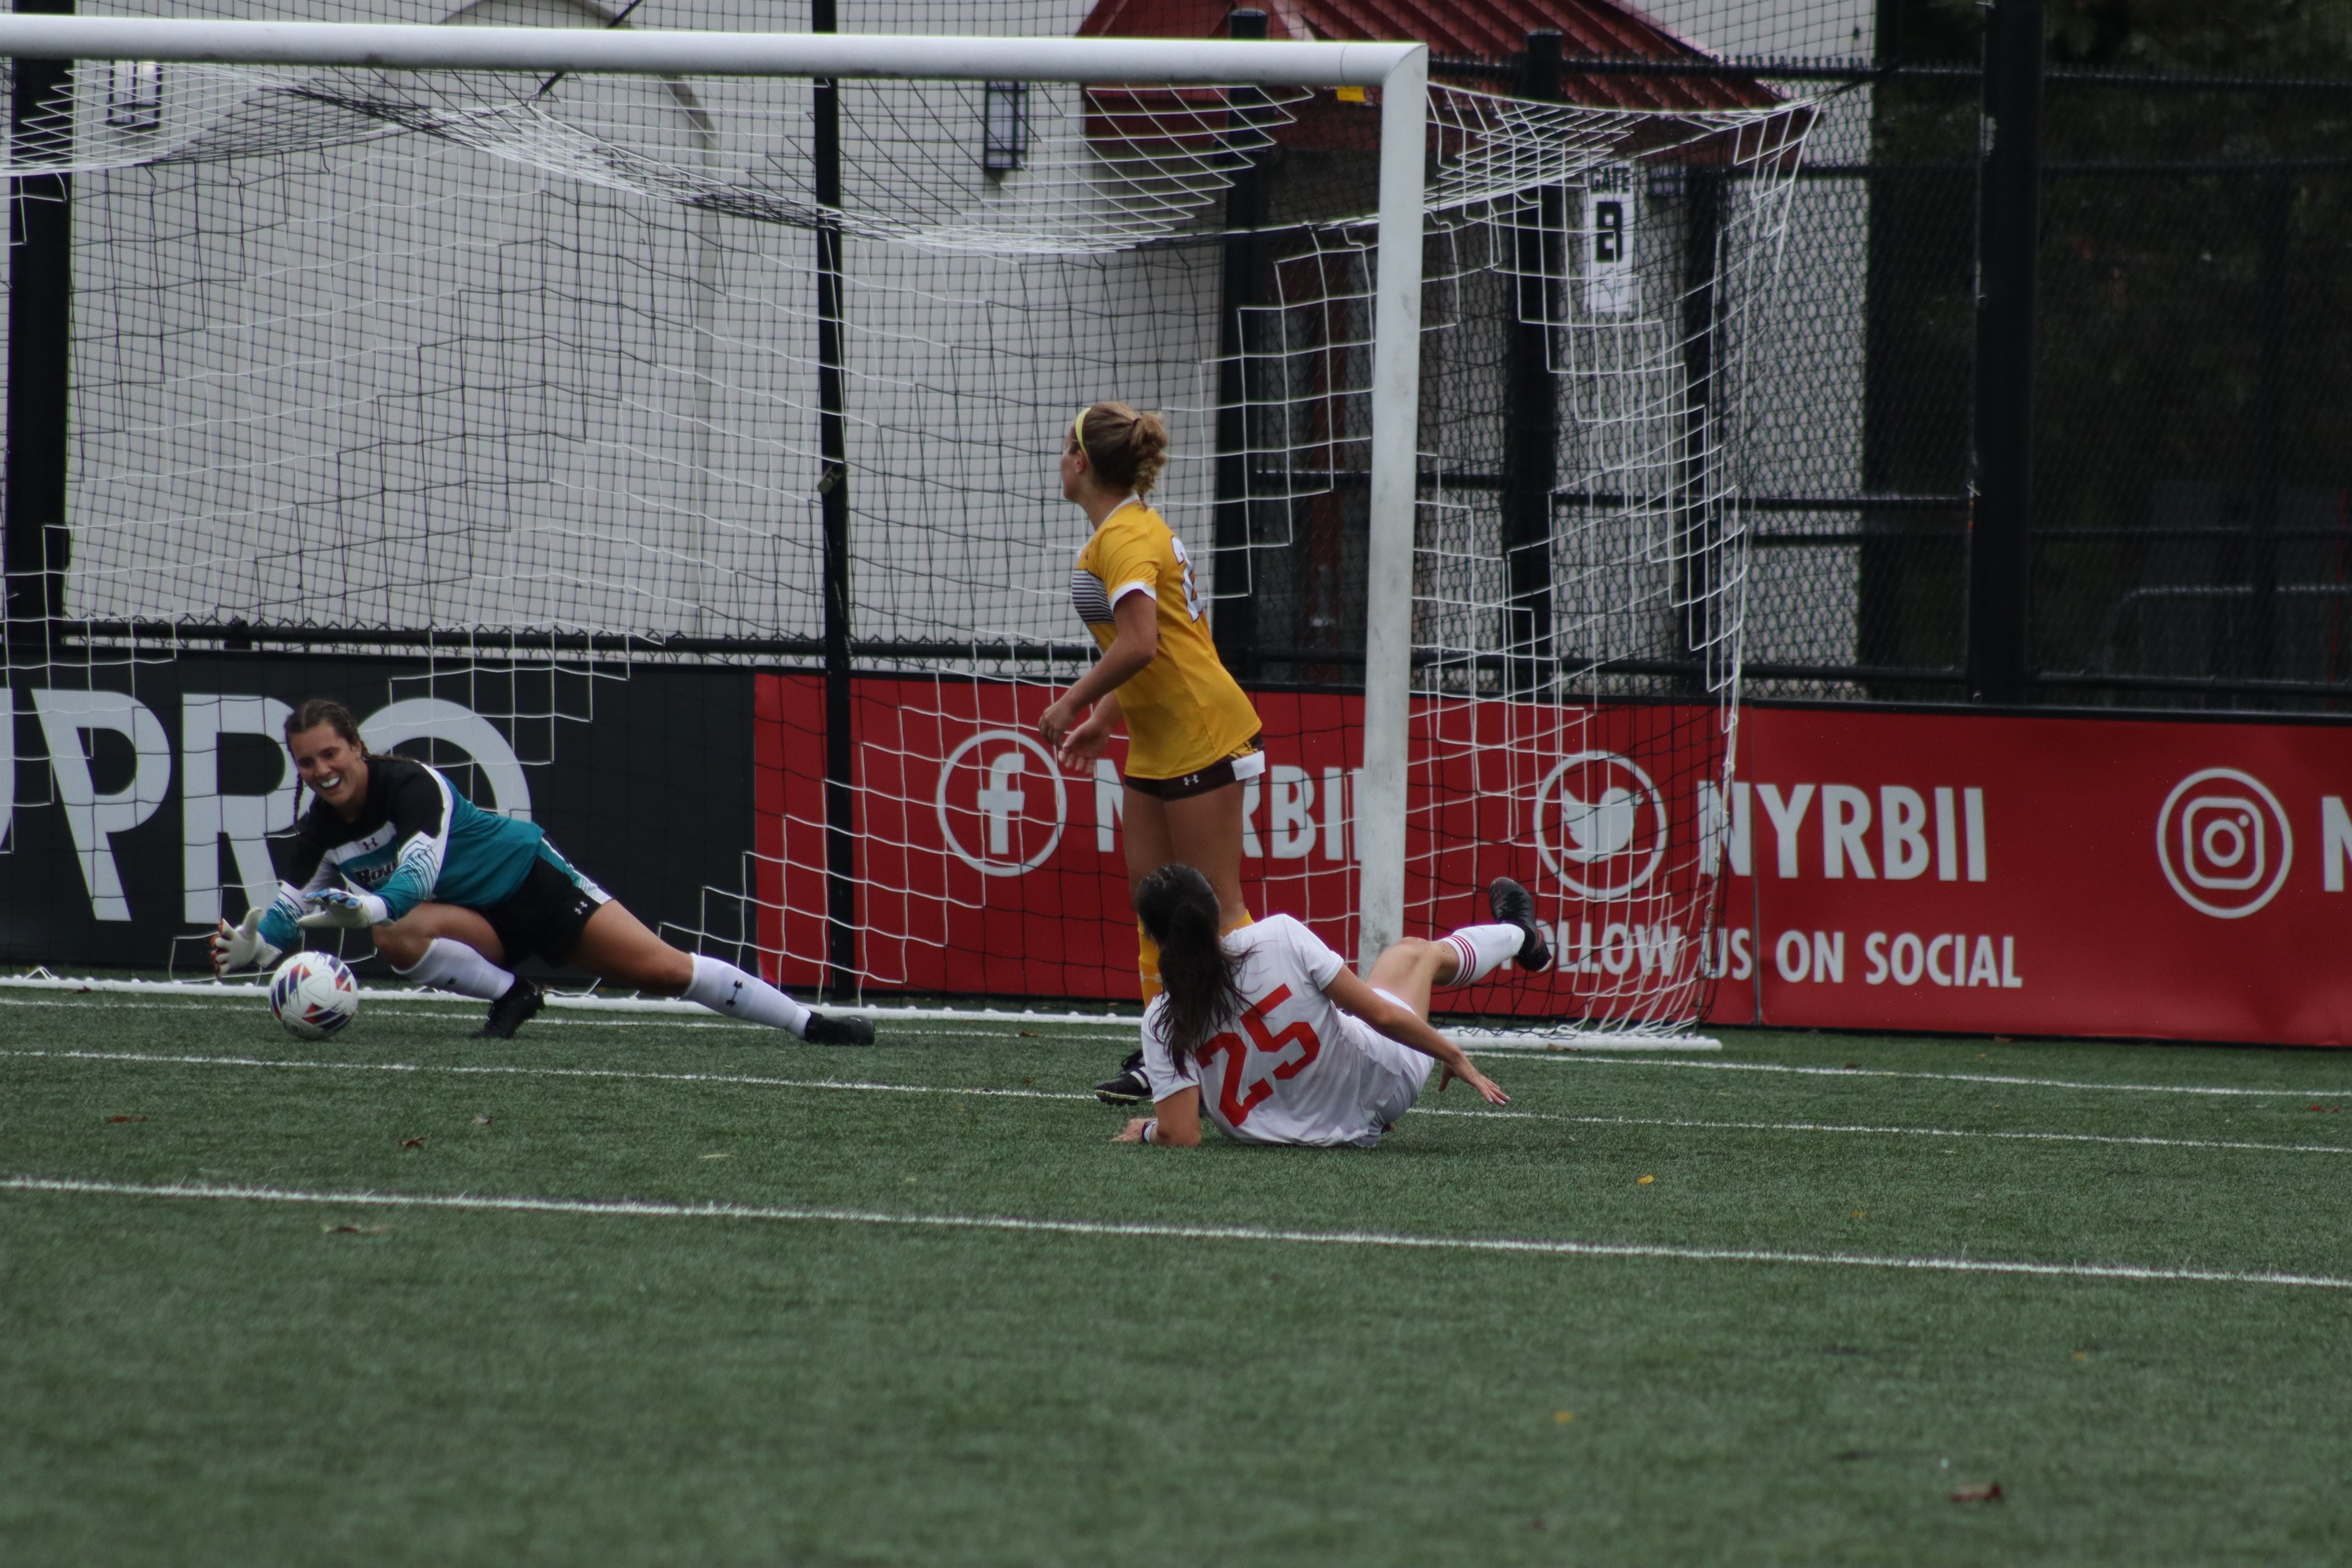 Sophomore attacker Kylie Prendergast making an effort to score but couldn't quite find the back of the net. Photo courtesy of Trevor Giesberg